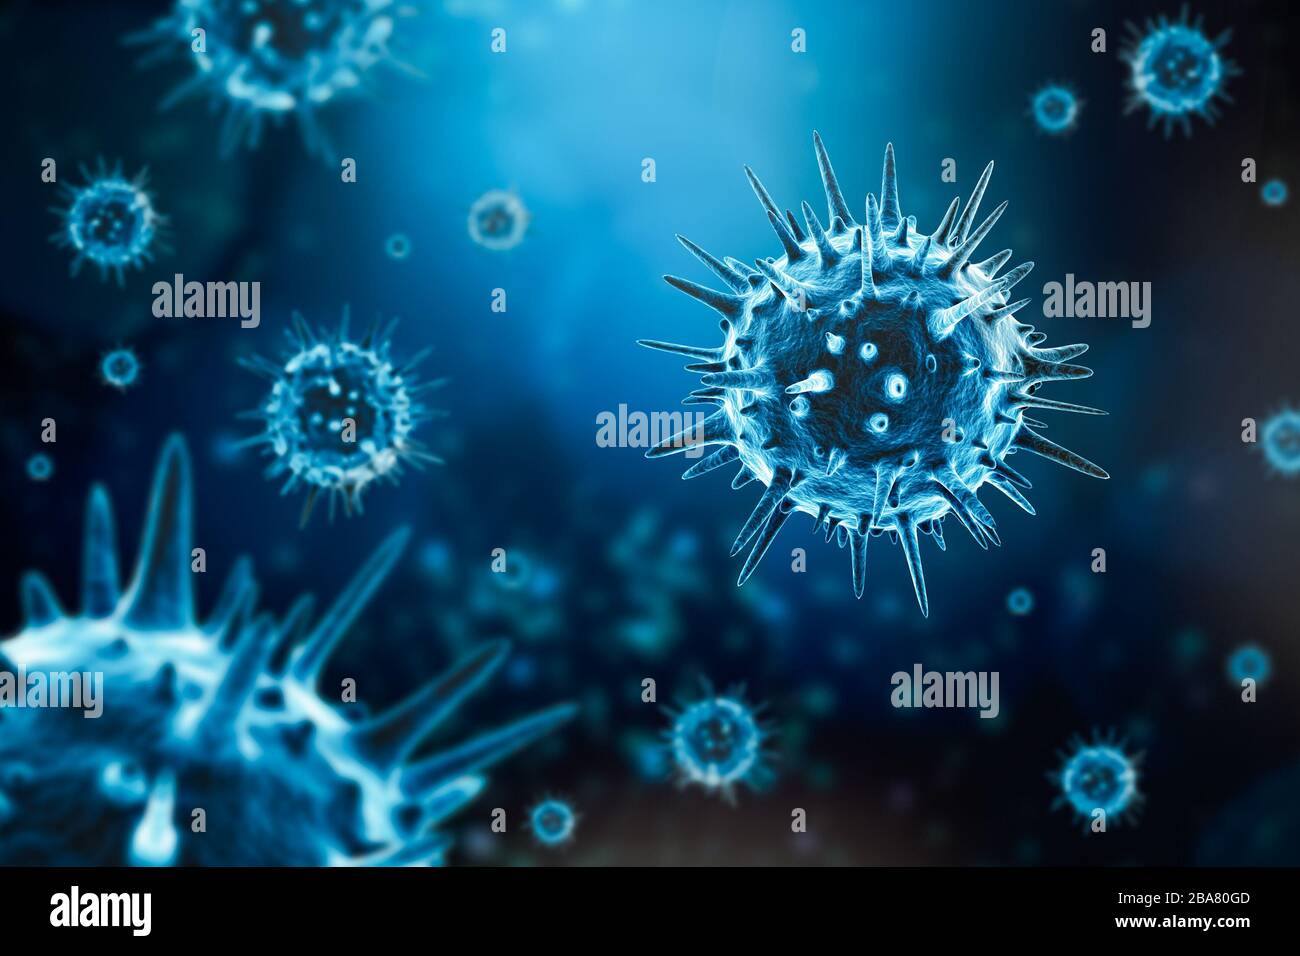 Microscopic generic virus cell 3D rendering illustration on a blue background. Microbiology, contagion, infection, epidemic, coronavirus, medicine, pa Stock Photo